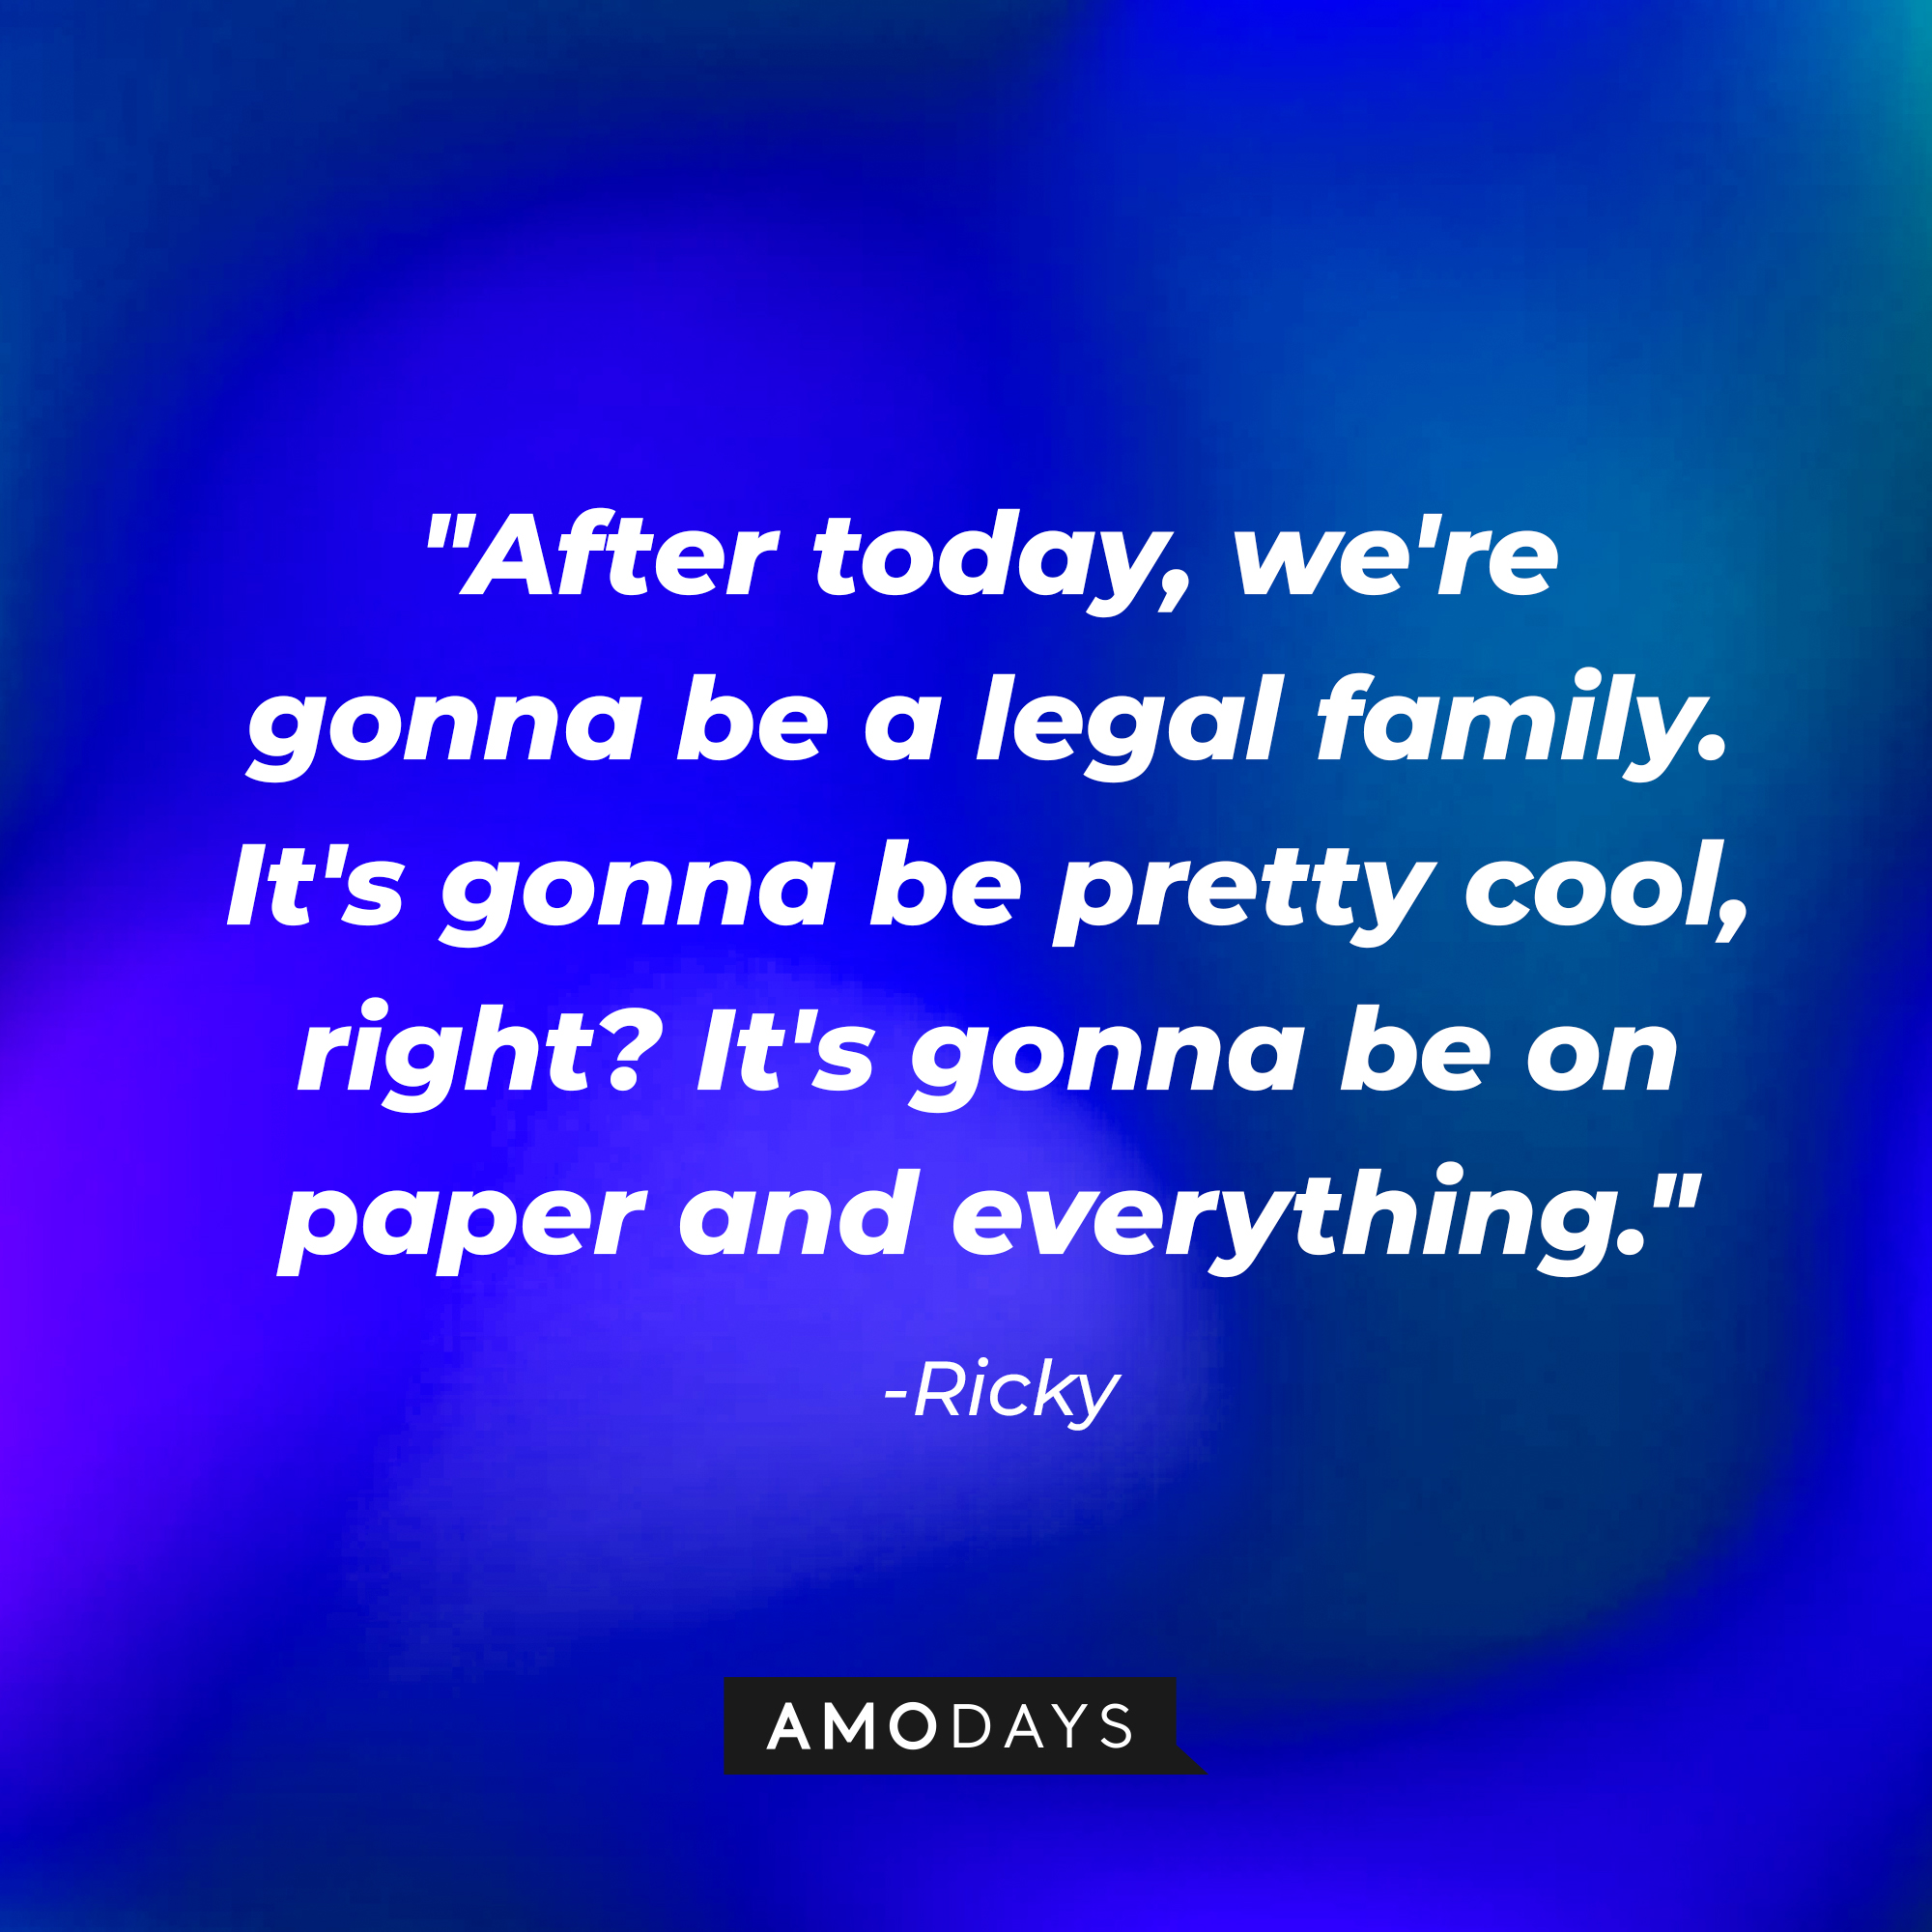 Ricky's quote, "After today, we're gonna be a legal family. It's gonna be pretty cool, right? It's gonna be on paper and everything." | Source: AmoDays